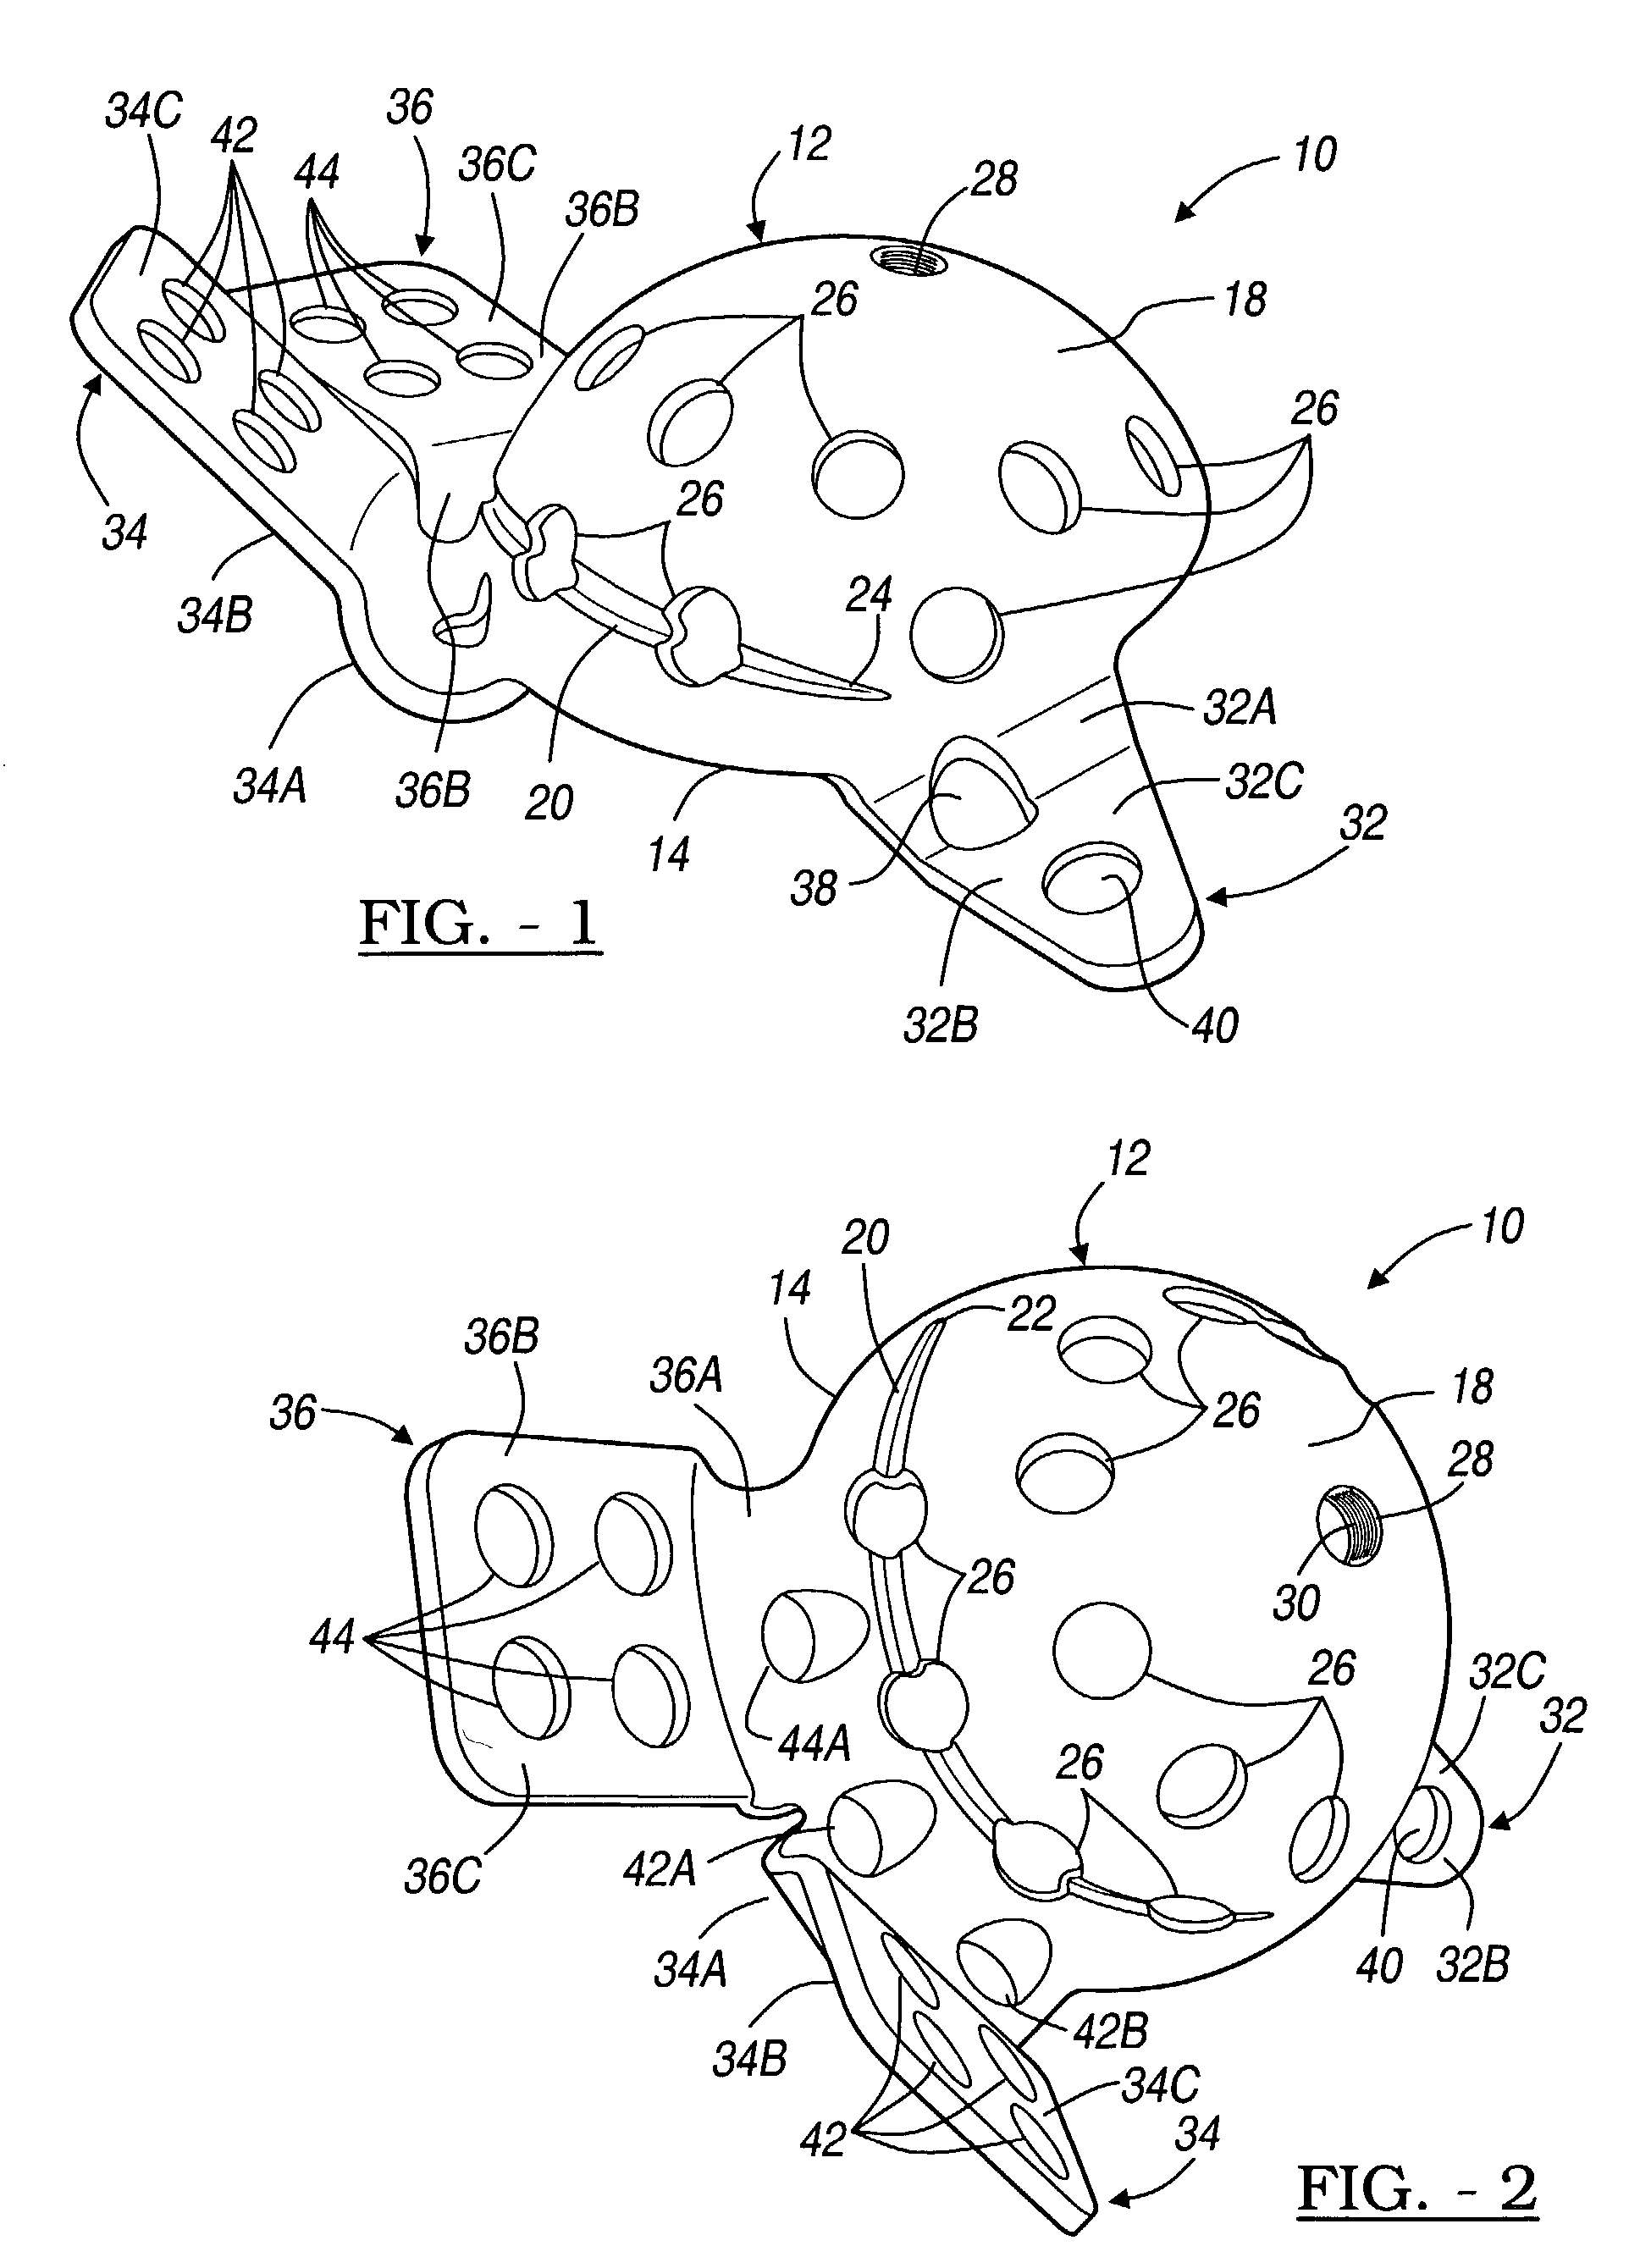 Method and apparatus for acetabular reconstruction